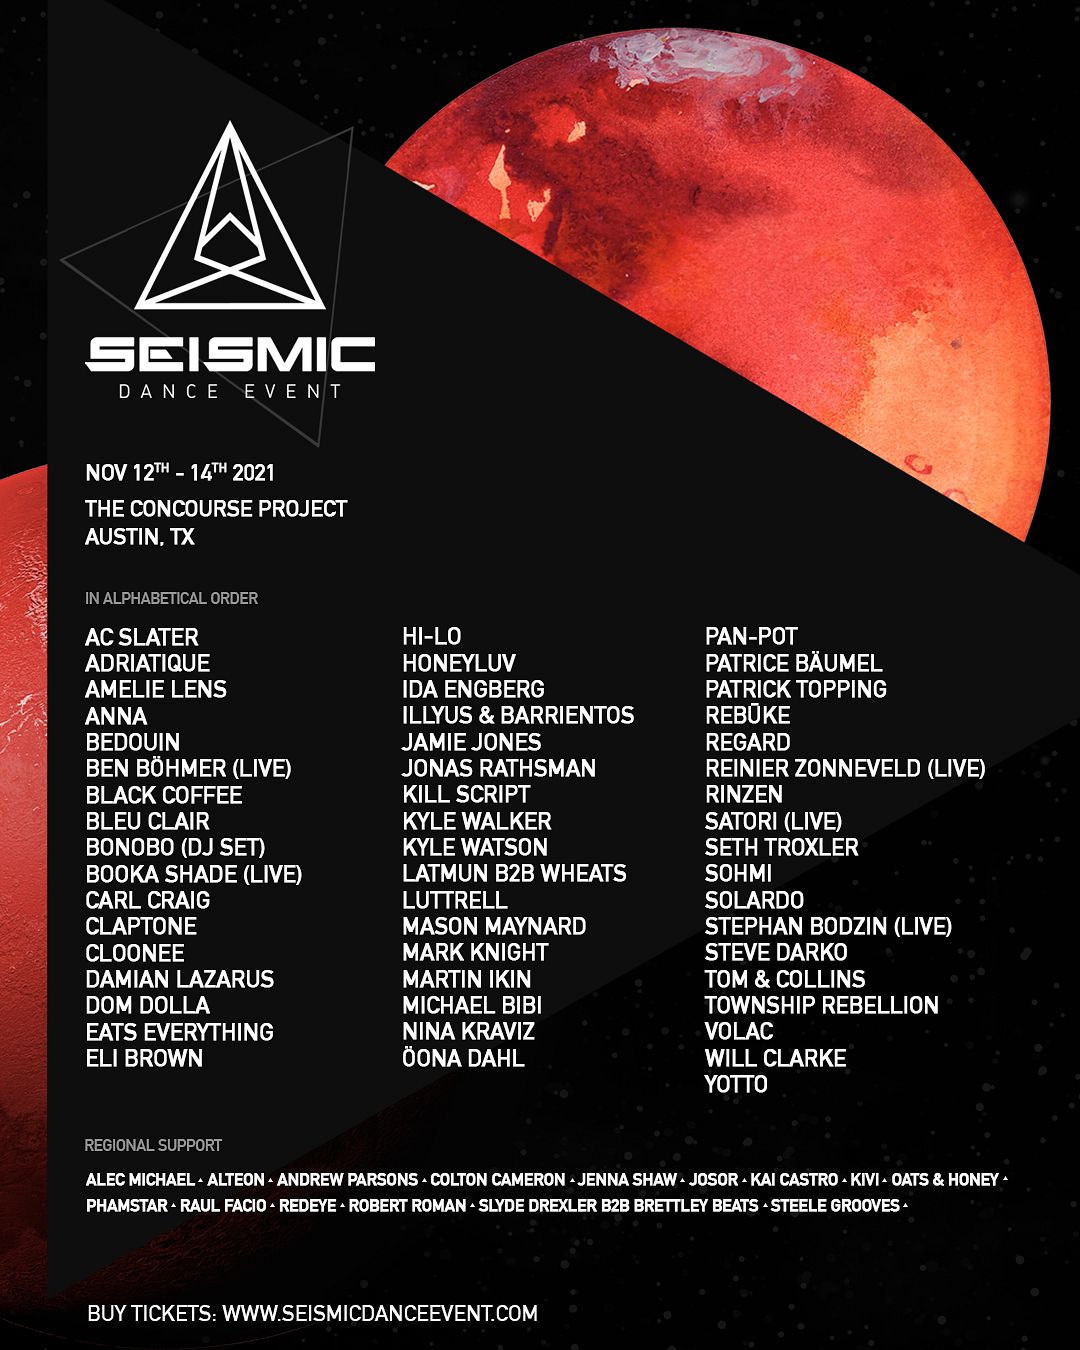 Seismic Dance Event 4.0 Tickets at The Concourse Project in Austin by